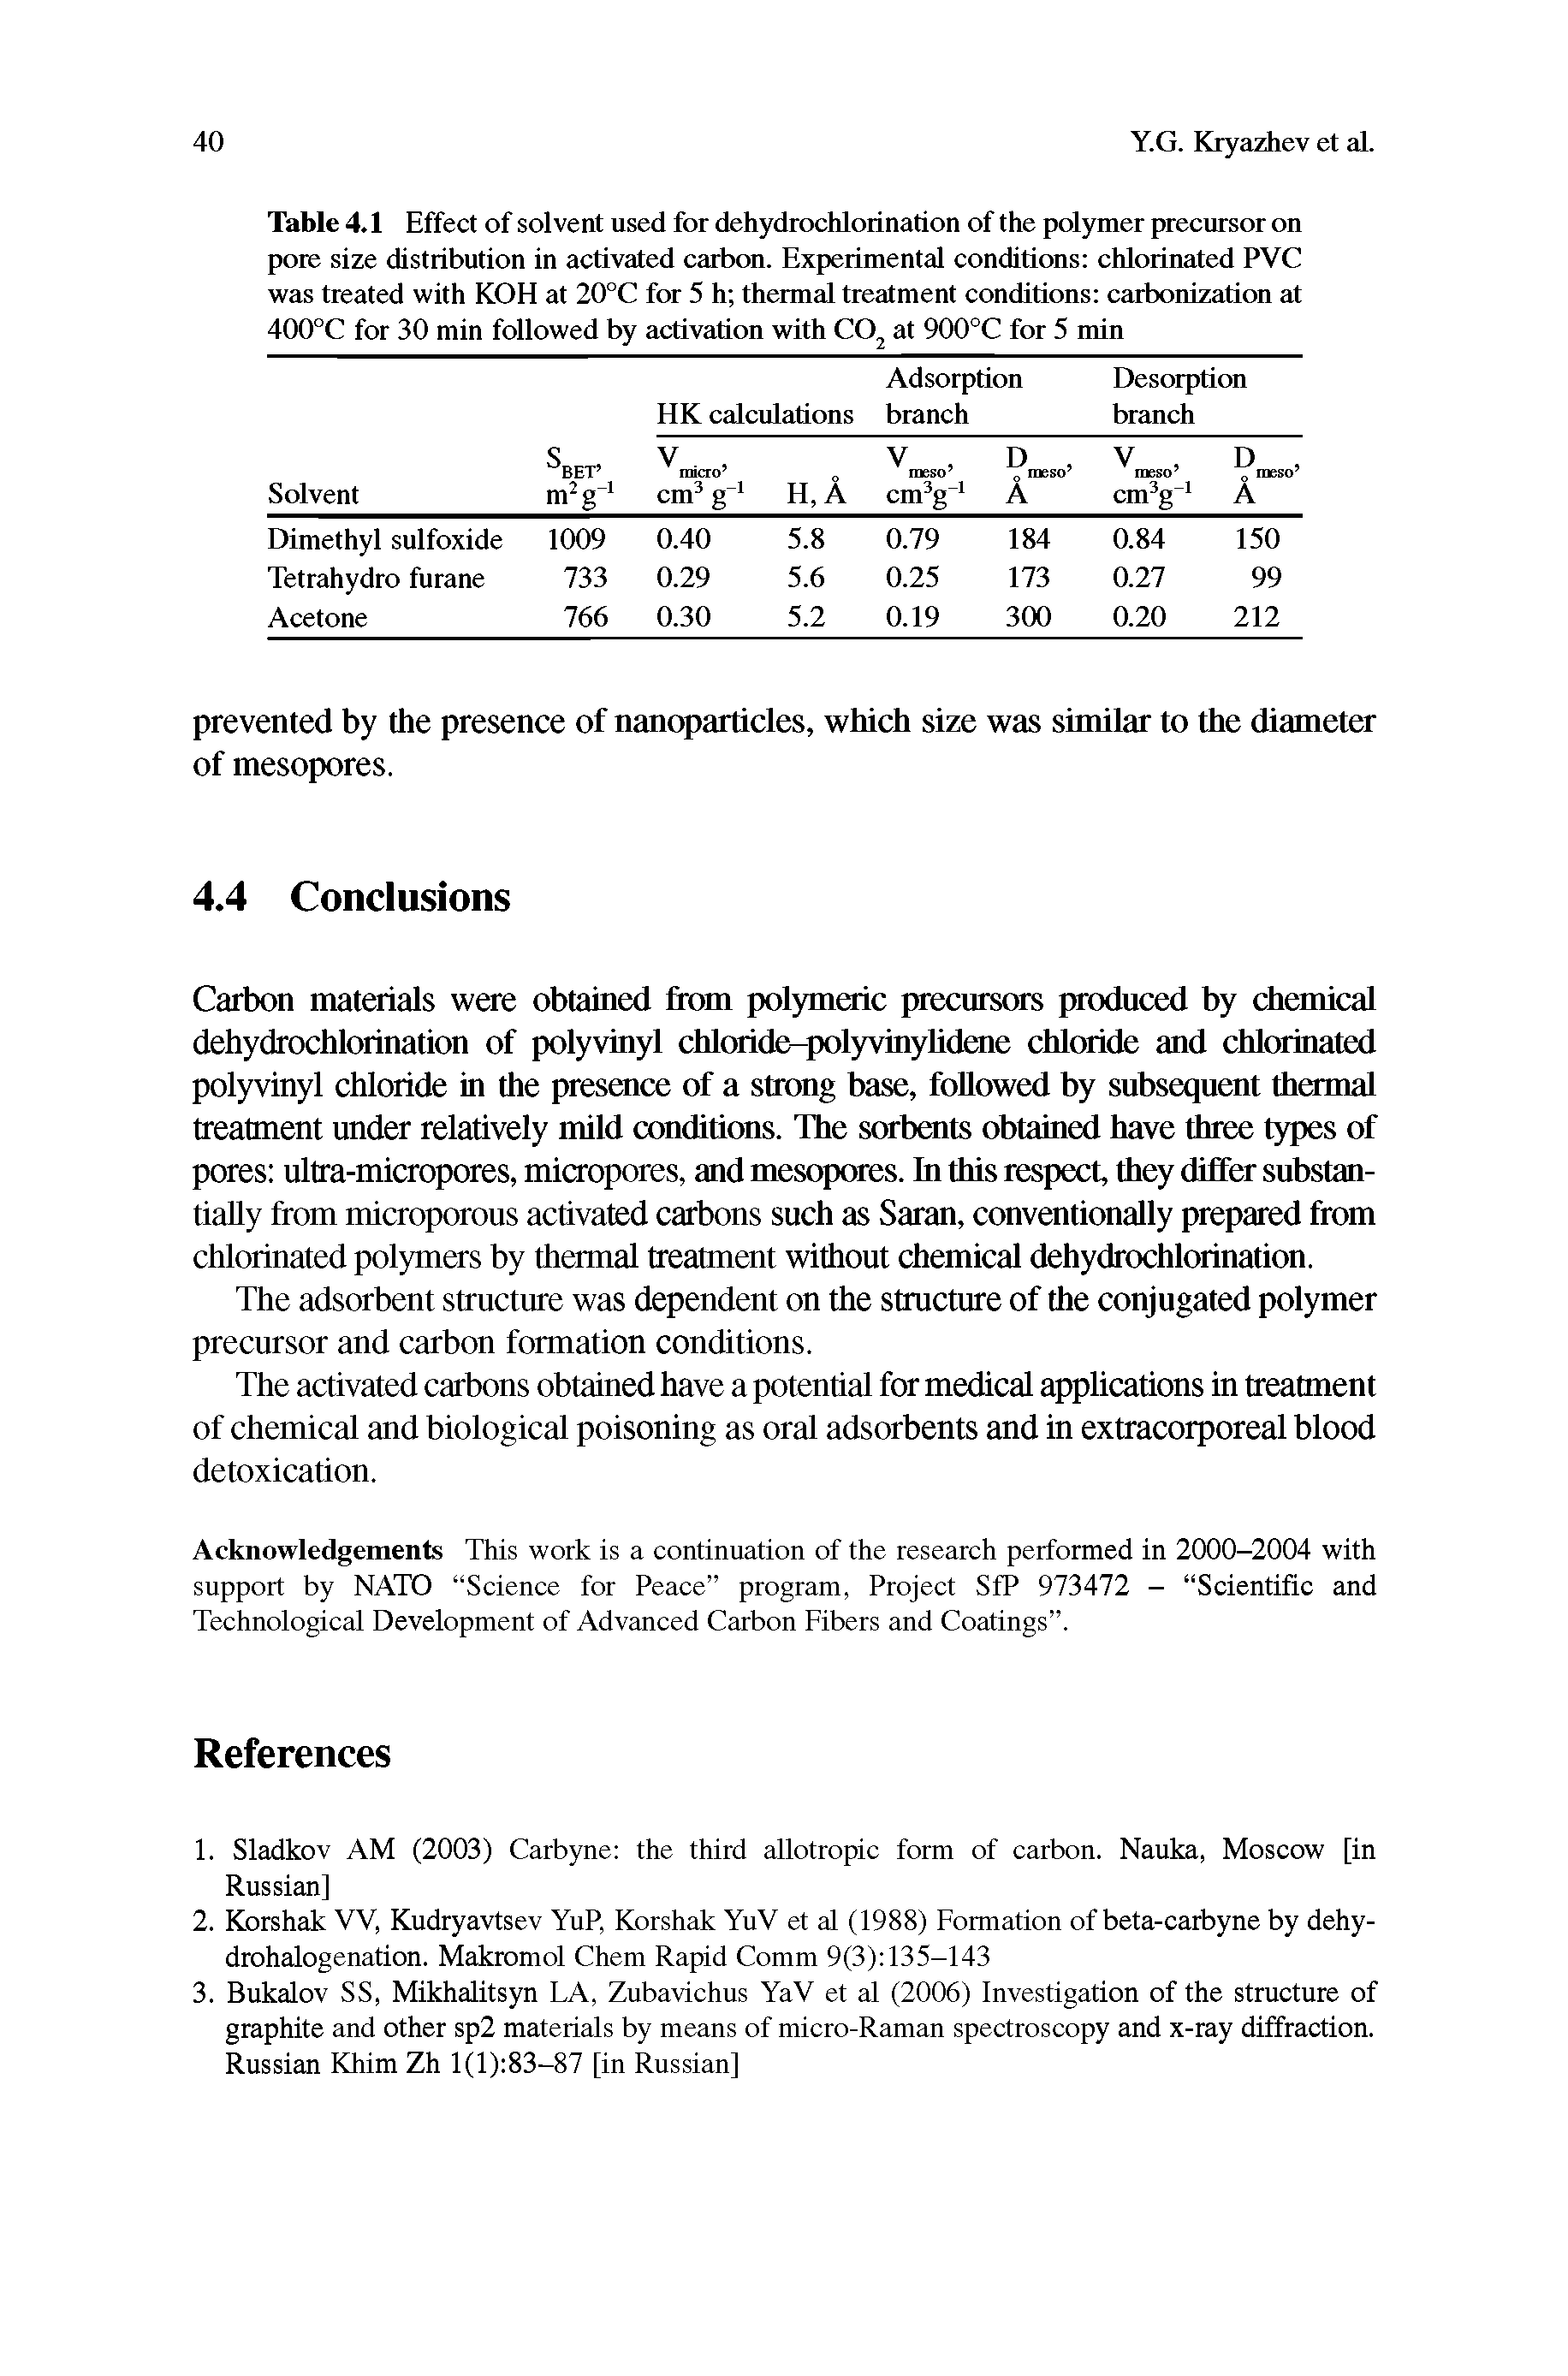 Table 4.1 Effect of solvent used for dehydrochlorination of the polymer precursor on pore size distribution in activated carbon. Experimental conditions chlorinated PVC was treated with KOH at 20°C for 5 h thermal treatment conditions carbonization at 400°C for 30 min followed by activation with CO at 900°C for 5 min...